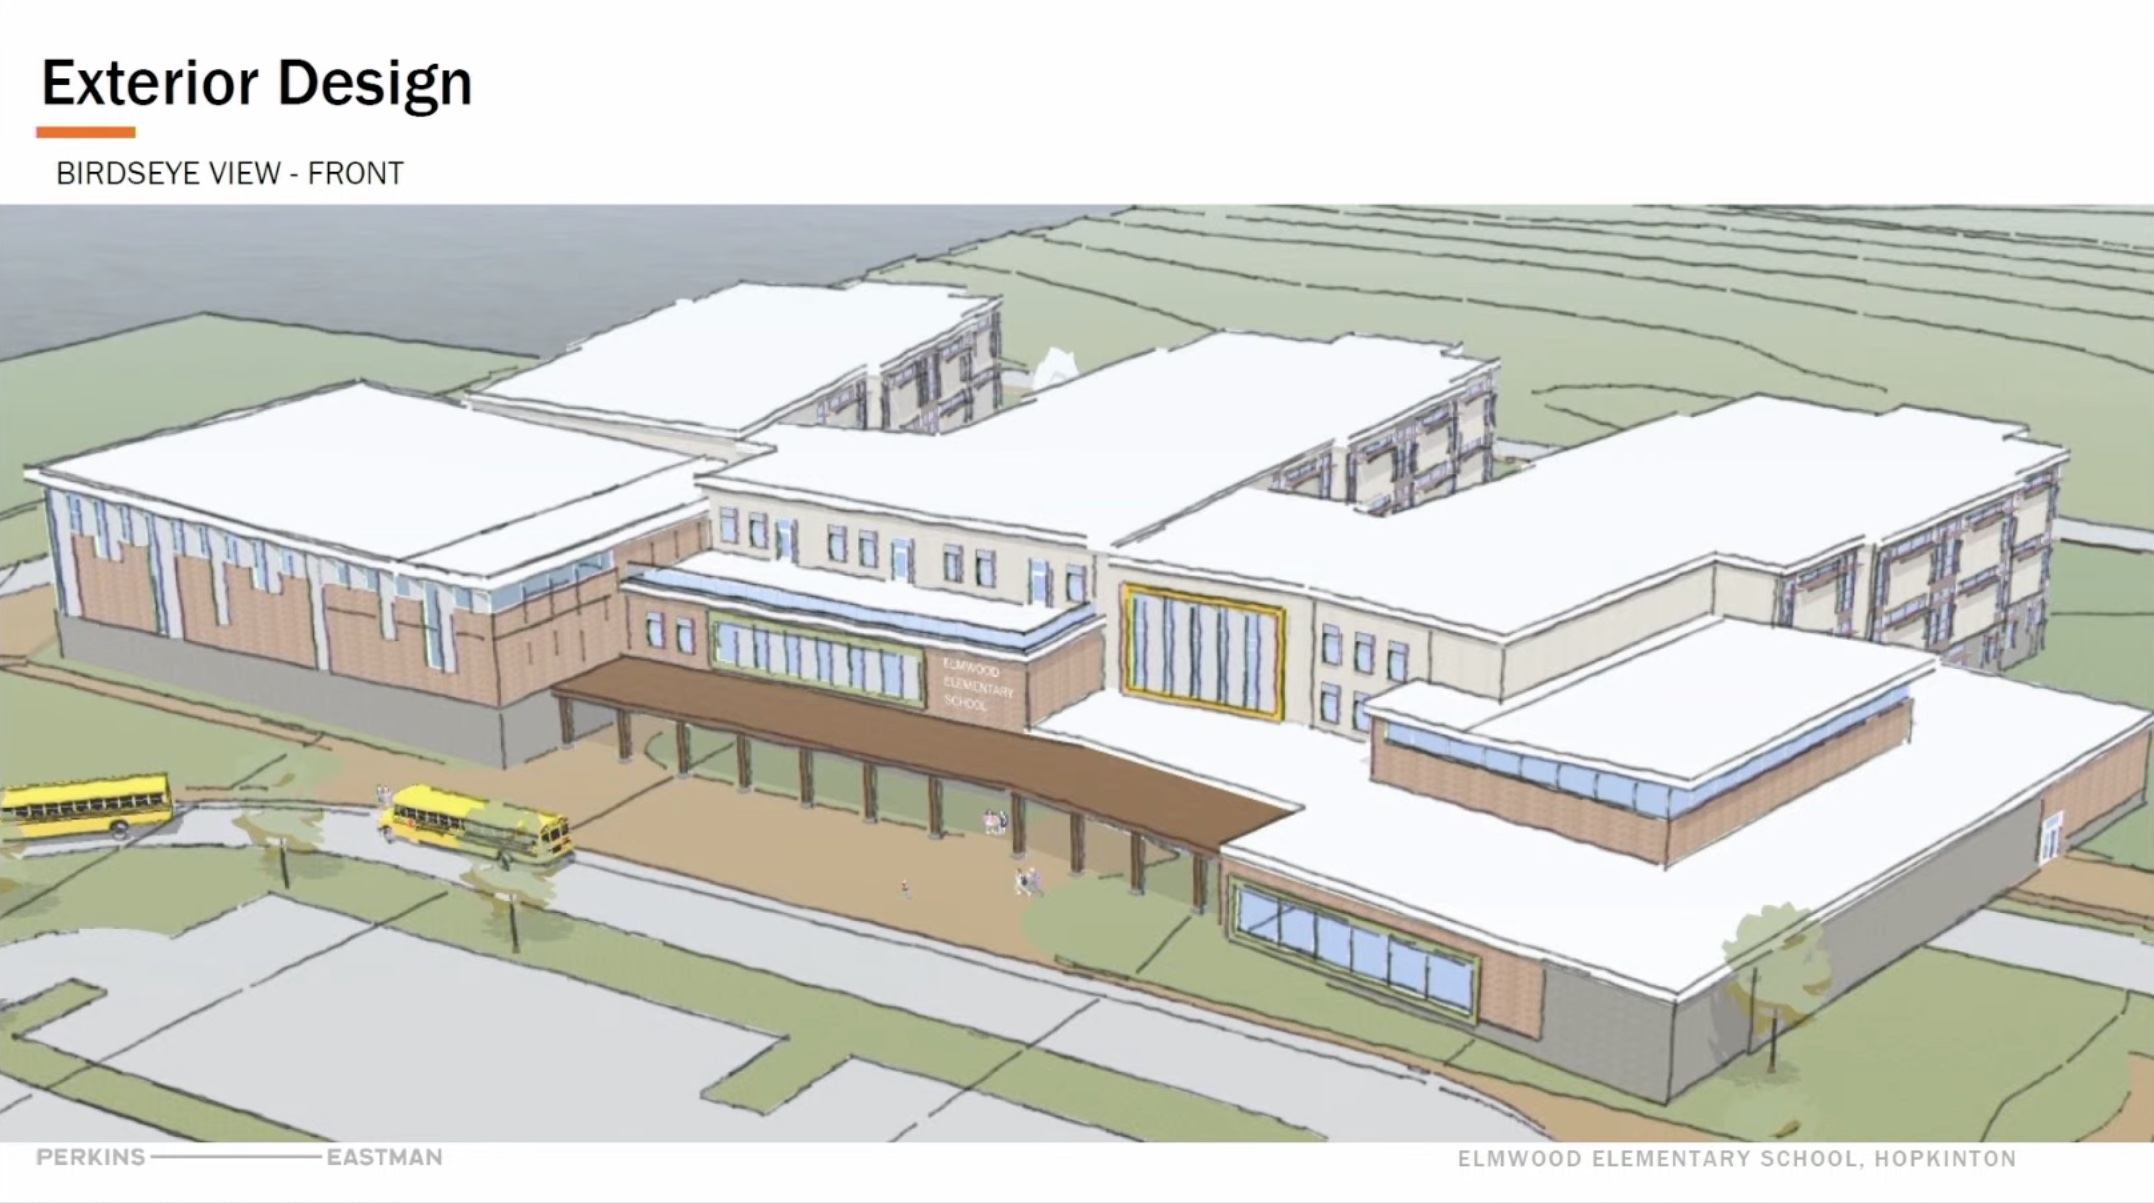 ESBC tells architects more financial details needed on proposed school project